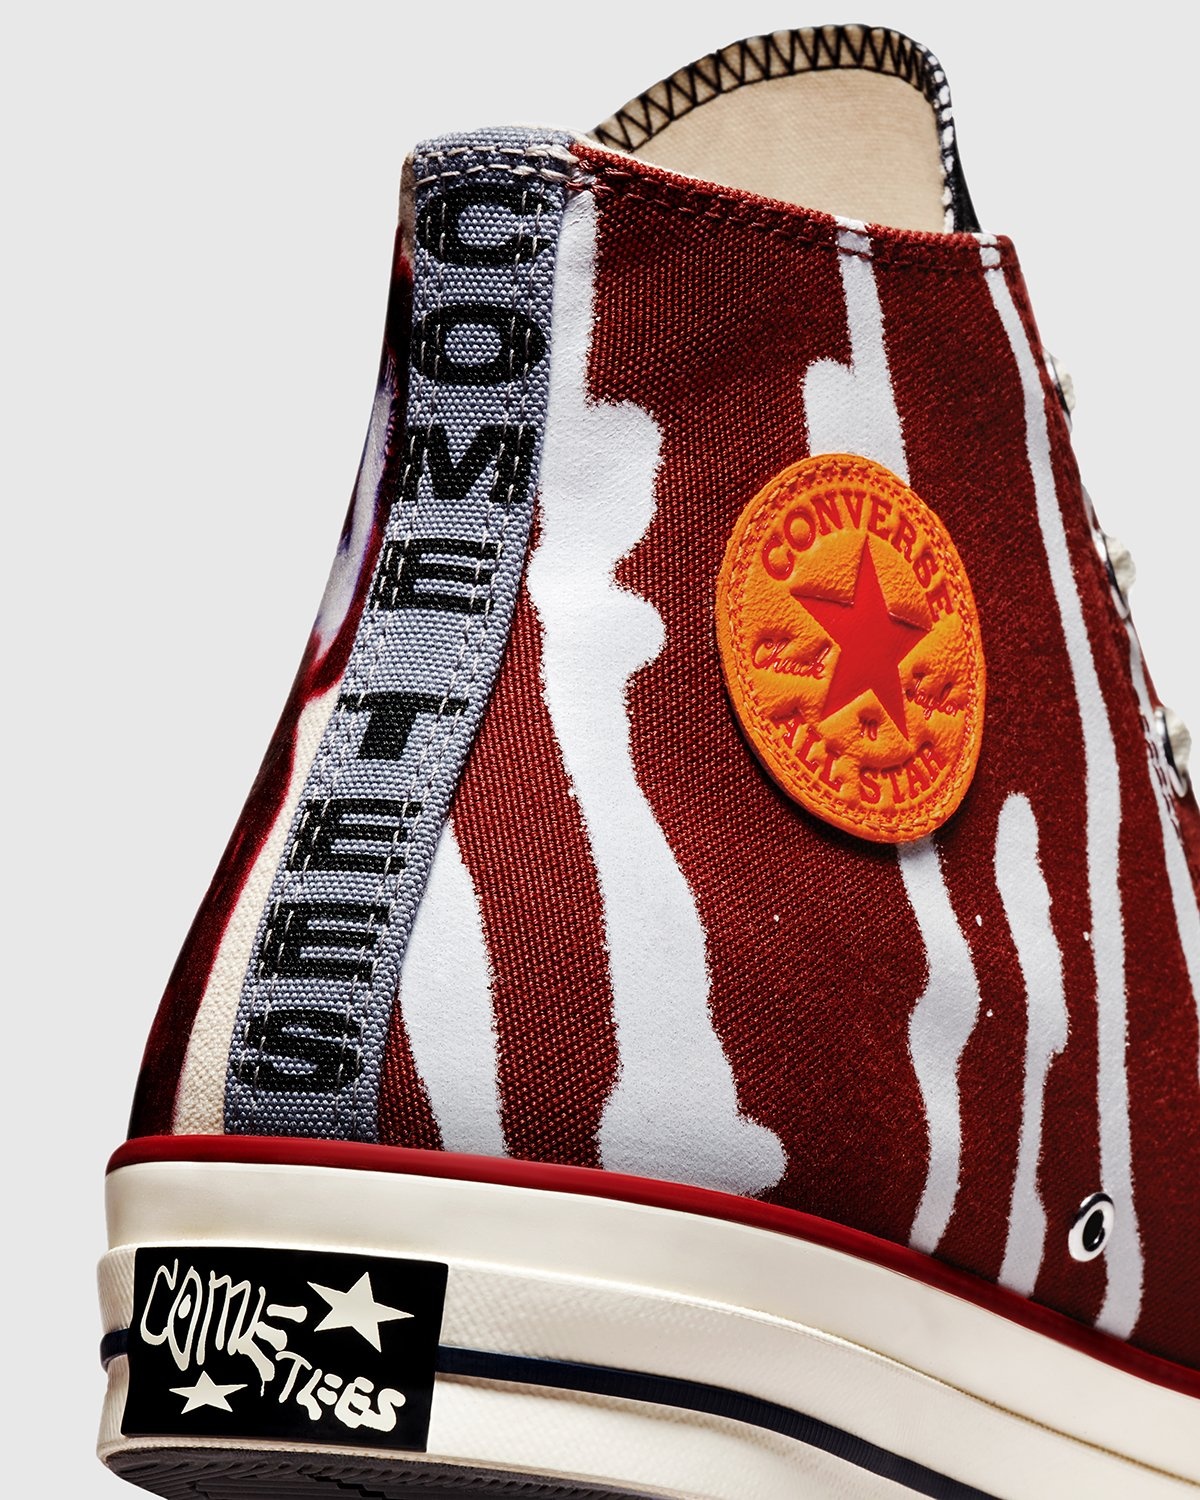 Converse x Come Tees – Chuck 70 Hi White/Multi/Egret - Sneakers - Red - Image 5